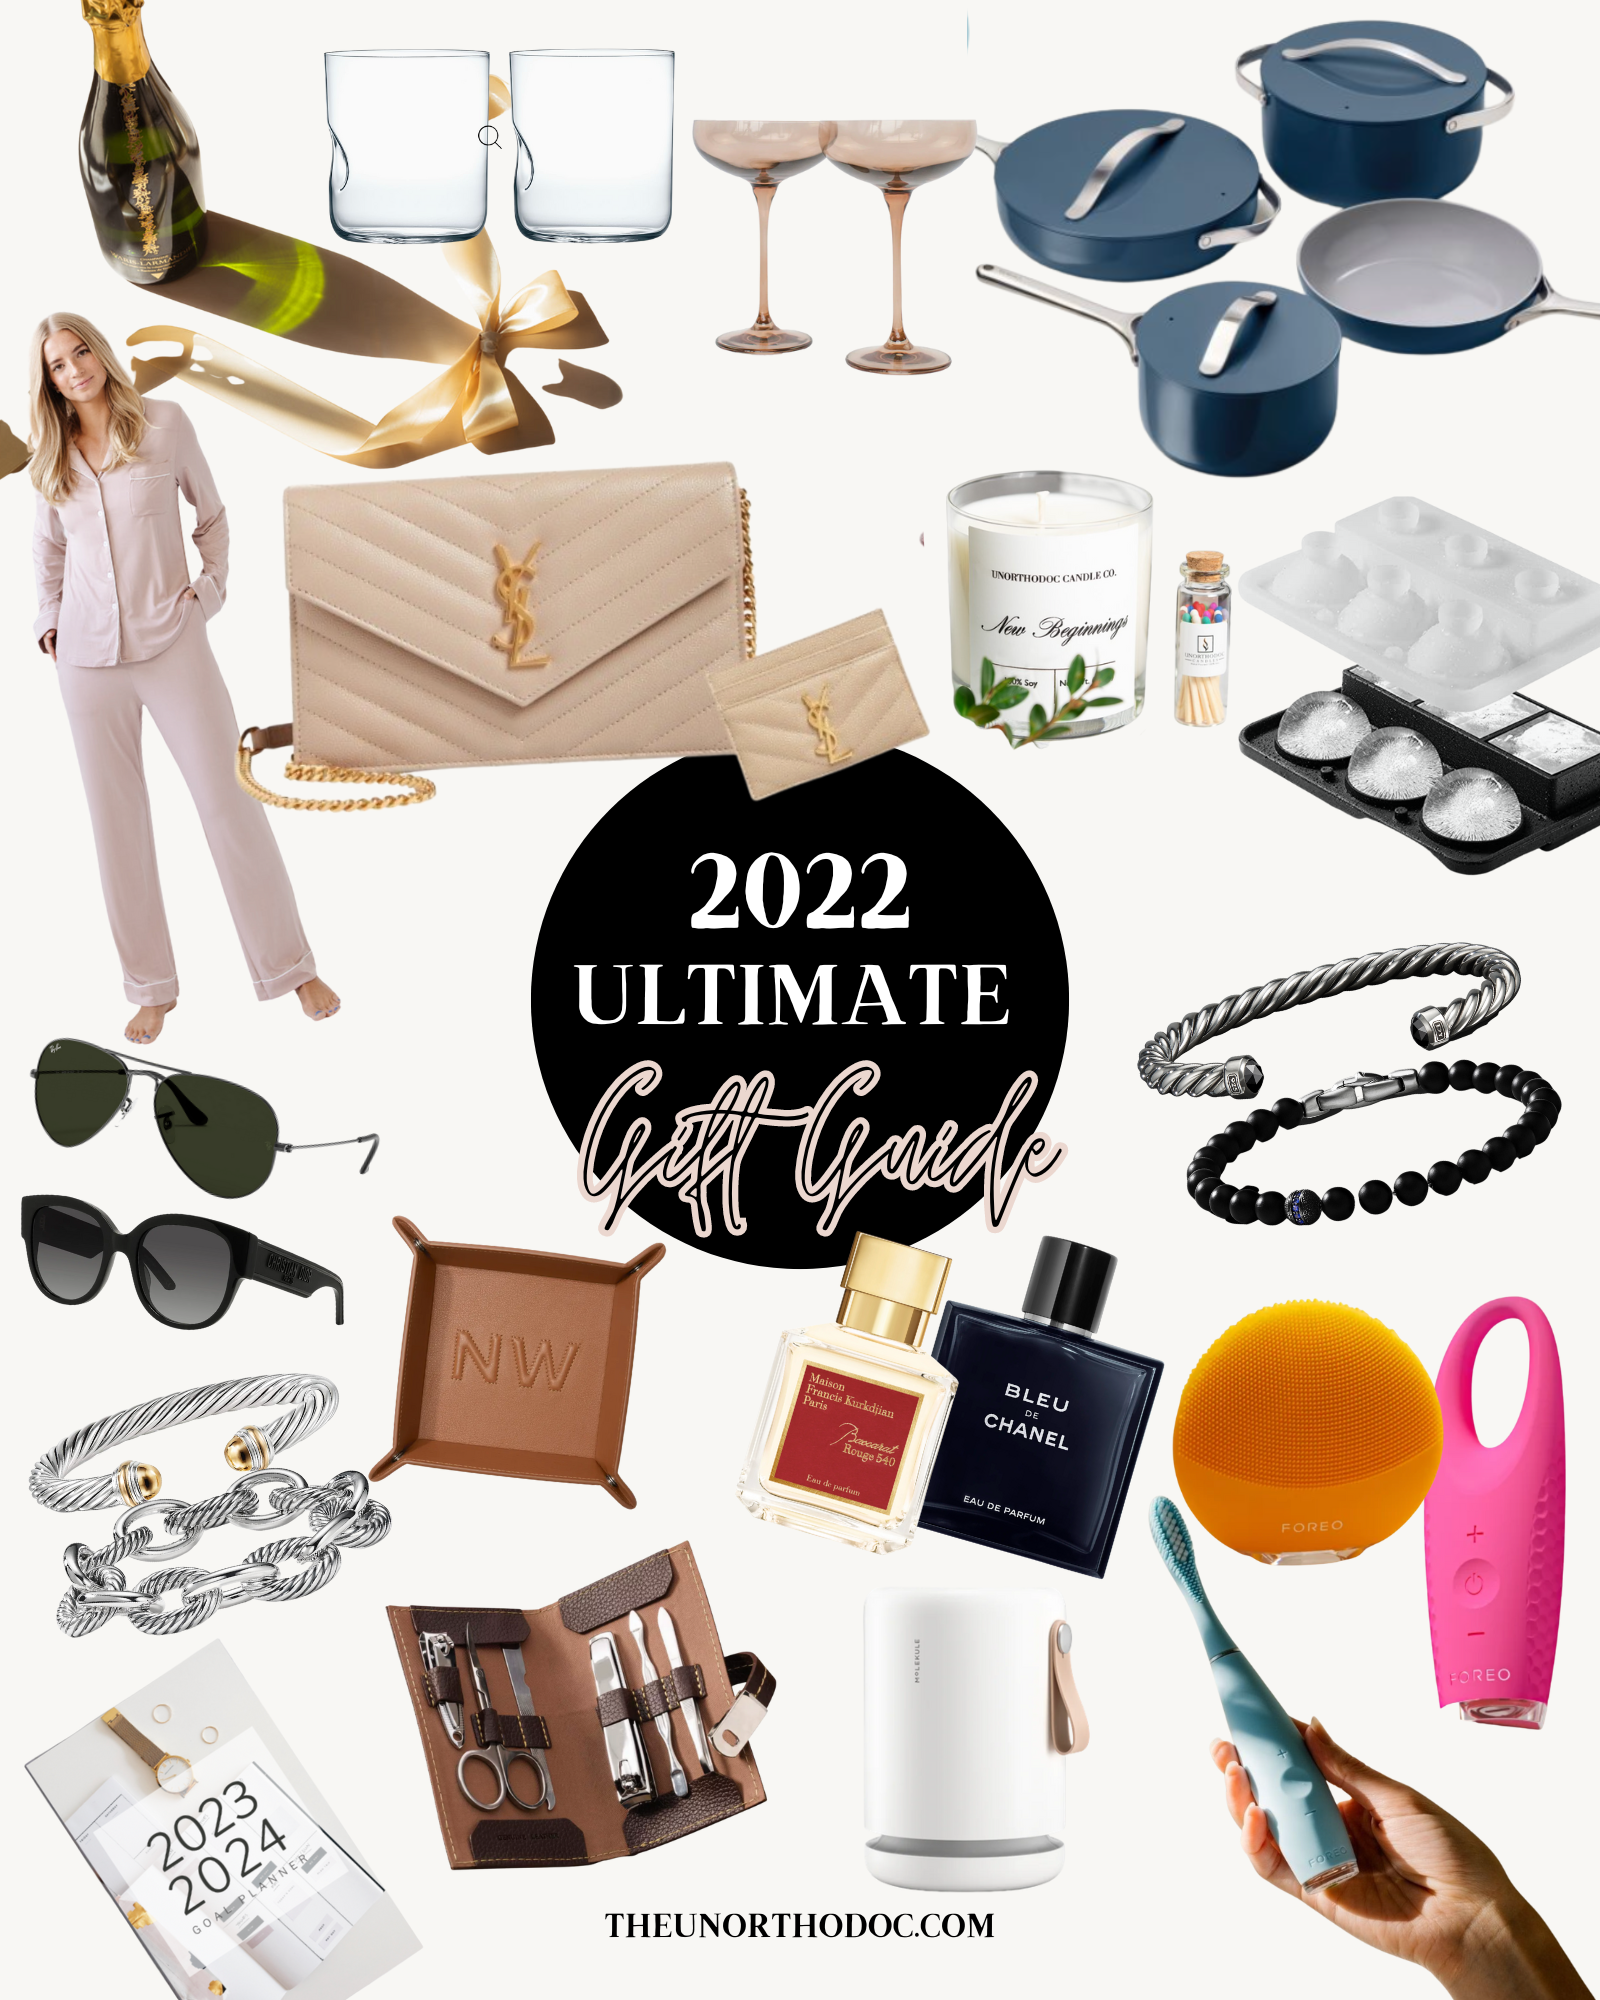 The AD Holiday 2022 Gift Guide Is Here: 88 Lavish Buys We Love